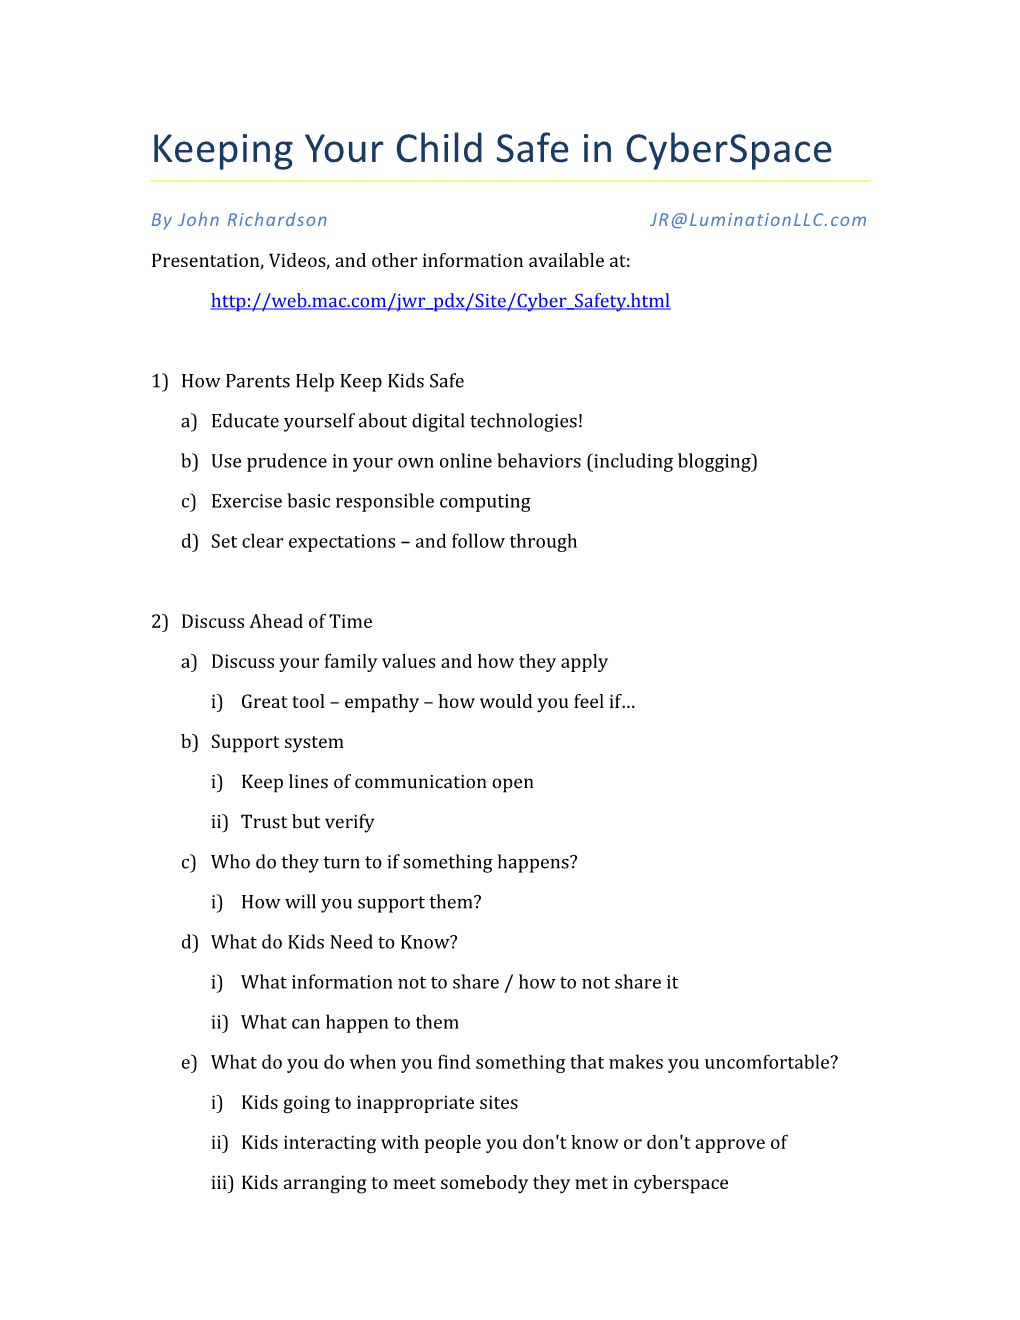 Keeping Your Child Safe in Cyberspace